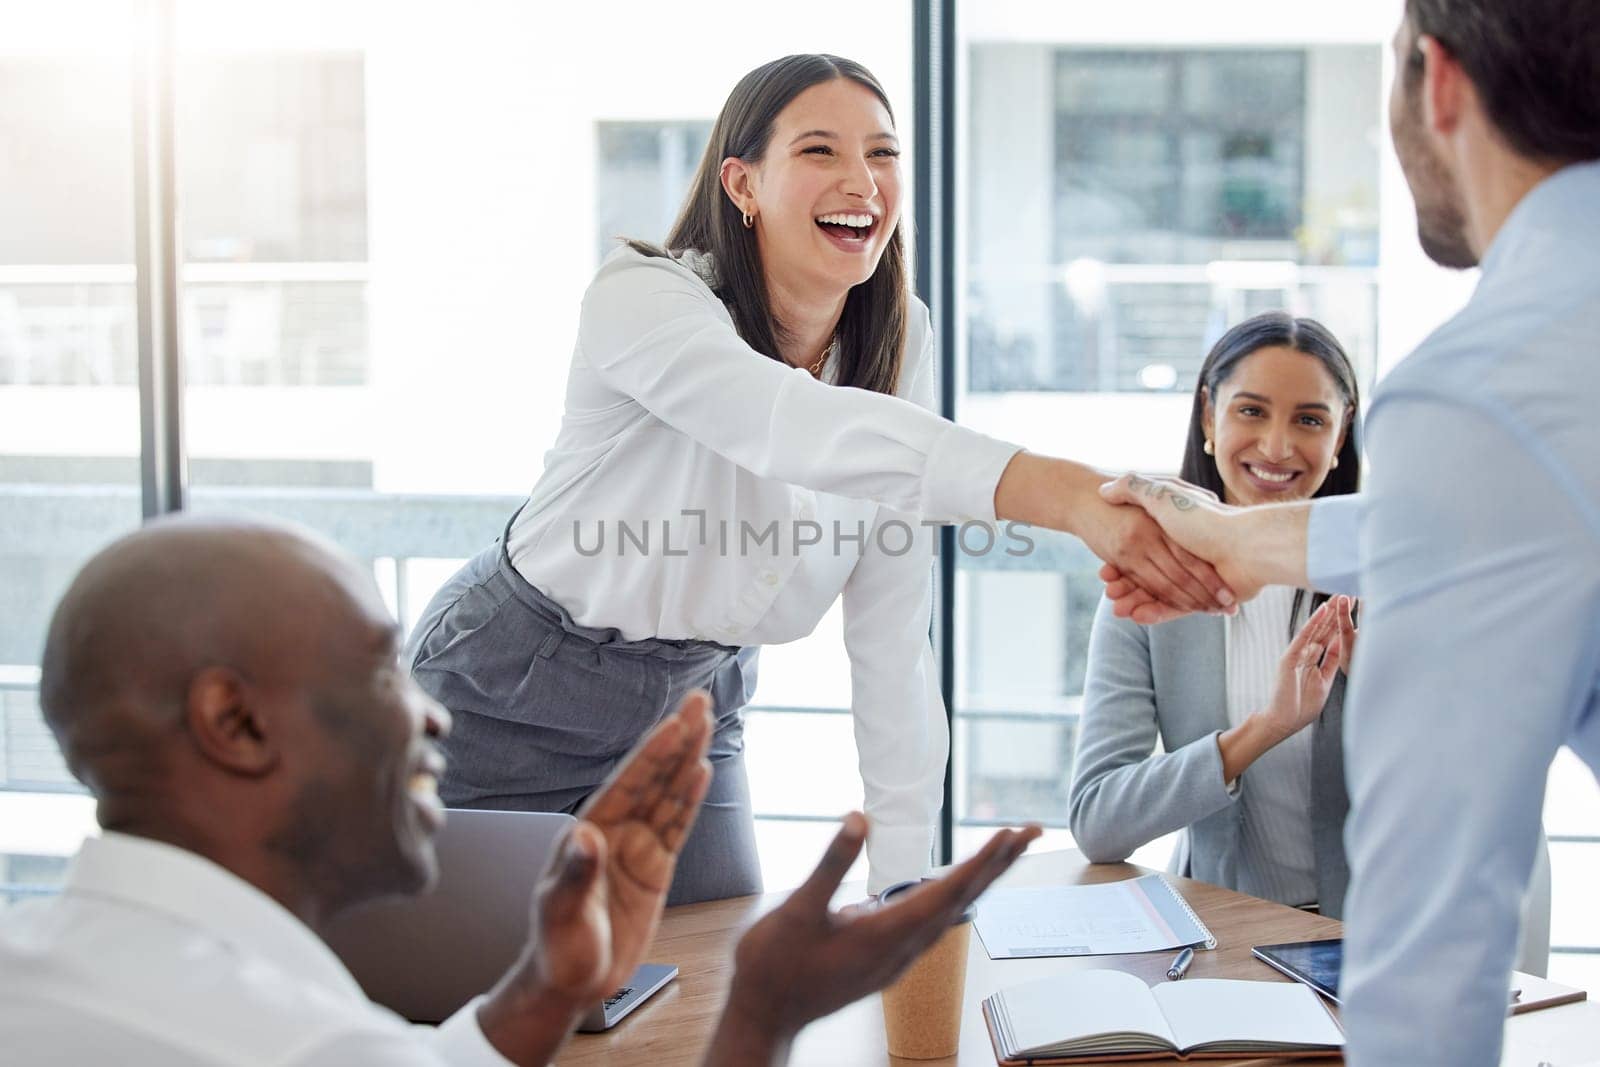 Professional, introduction and shaking hands at the office during a meeting with applause. Business person, welcome and congratulation for a collaboration in the workplace for hiring and teamwork